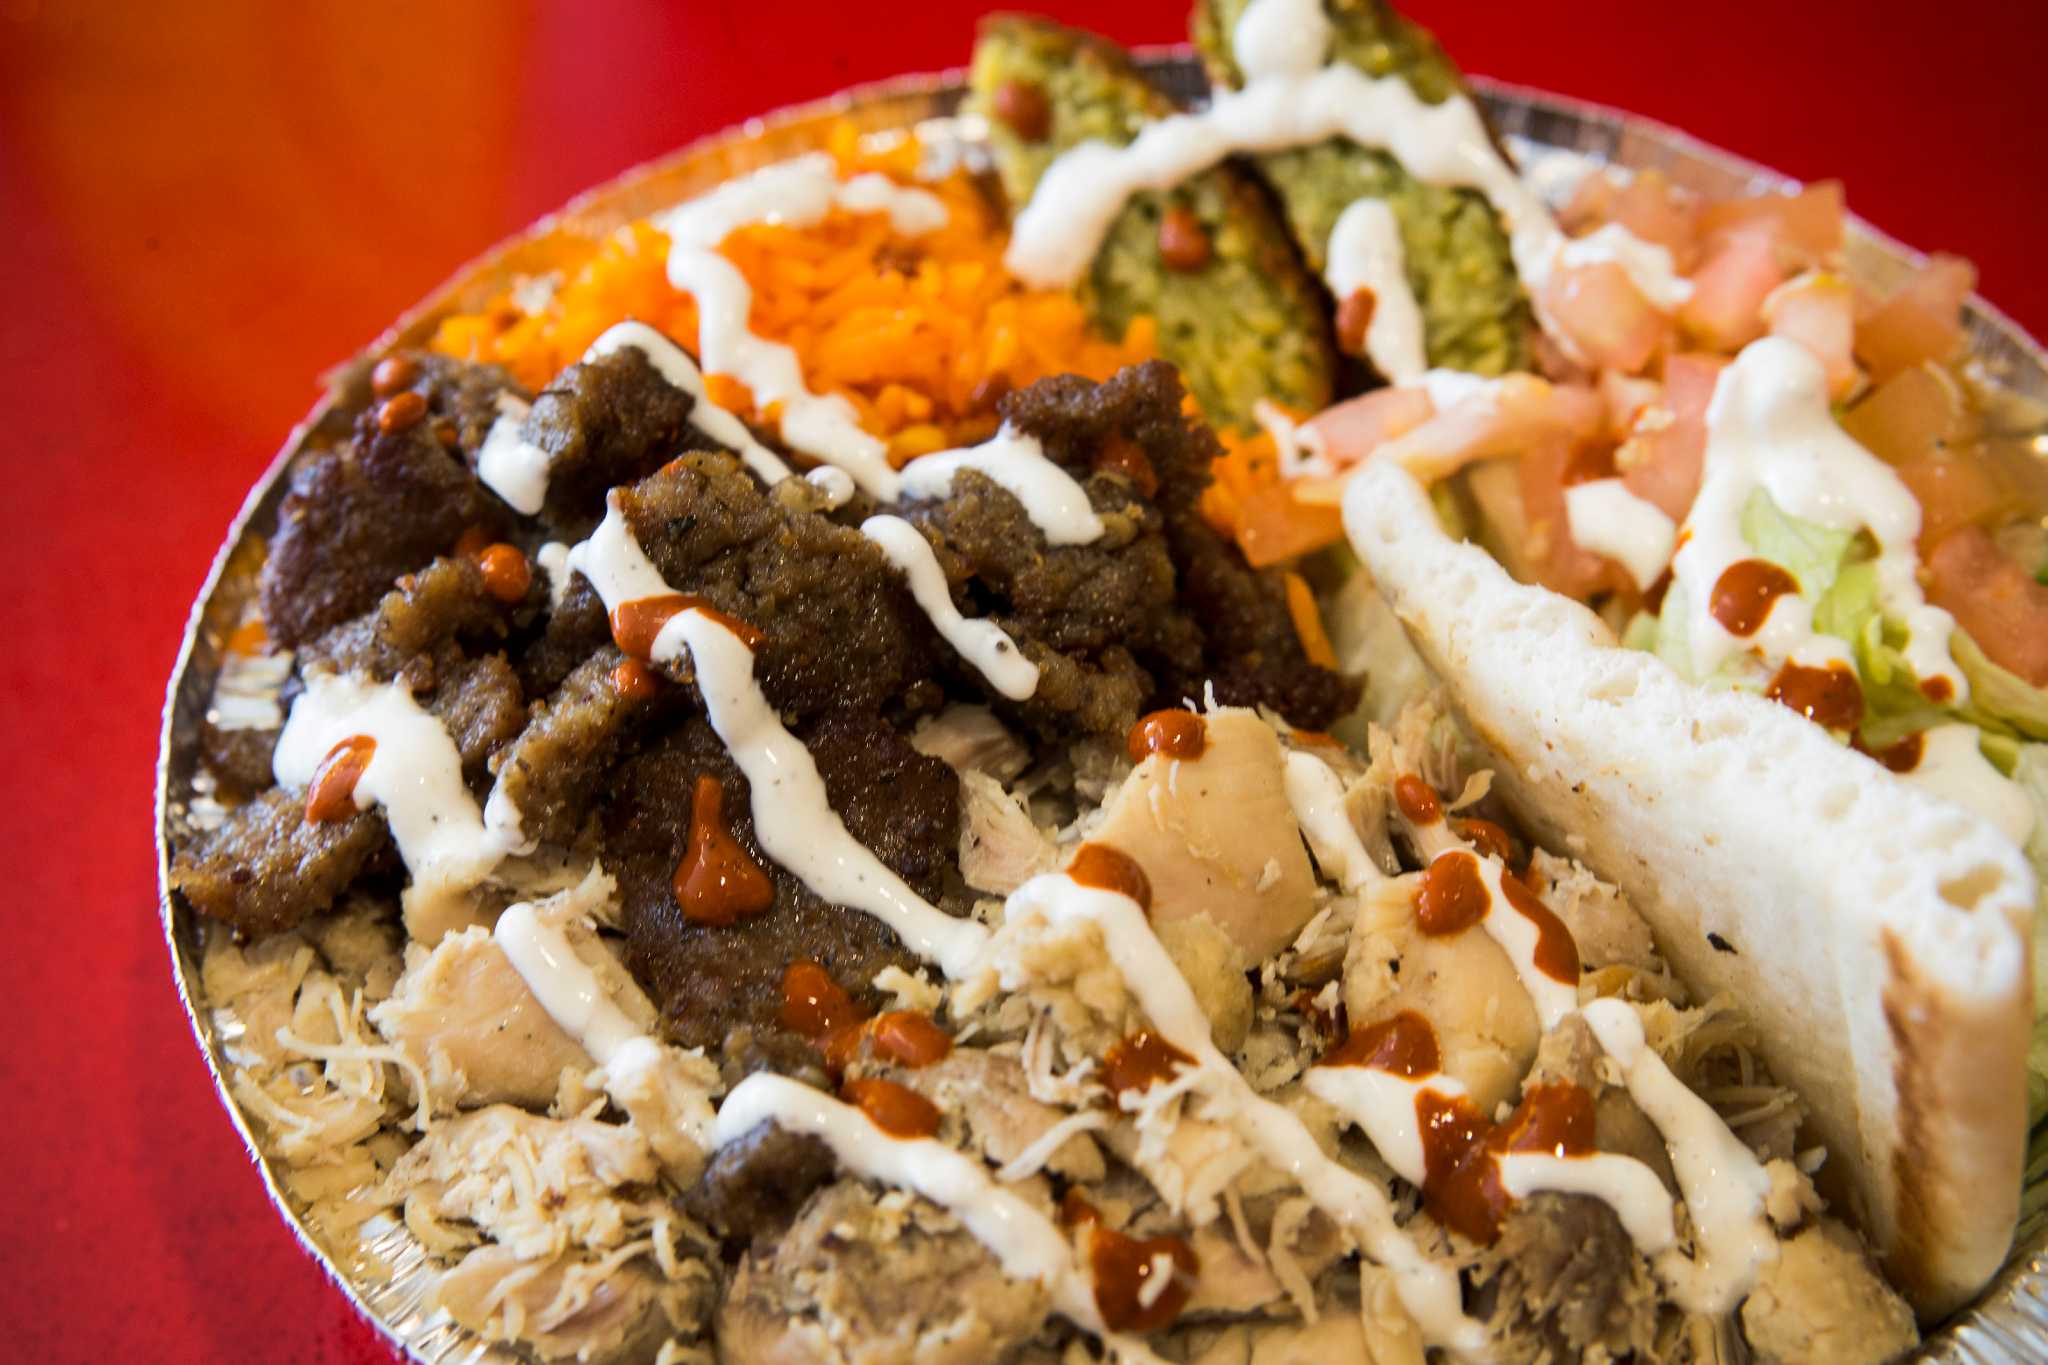 The Halal Guys is set for big opening - Houston Chronicle